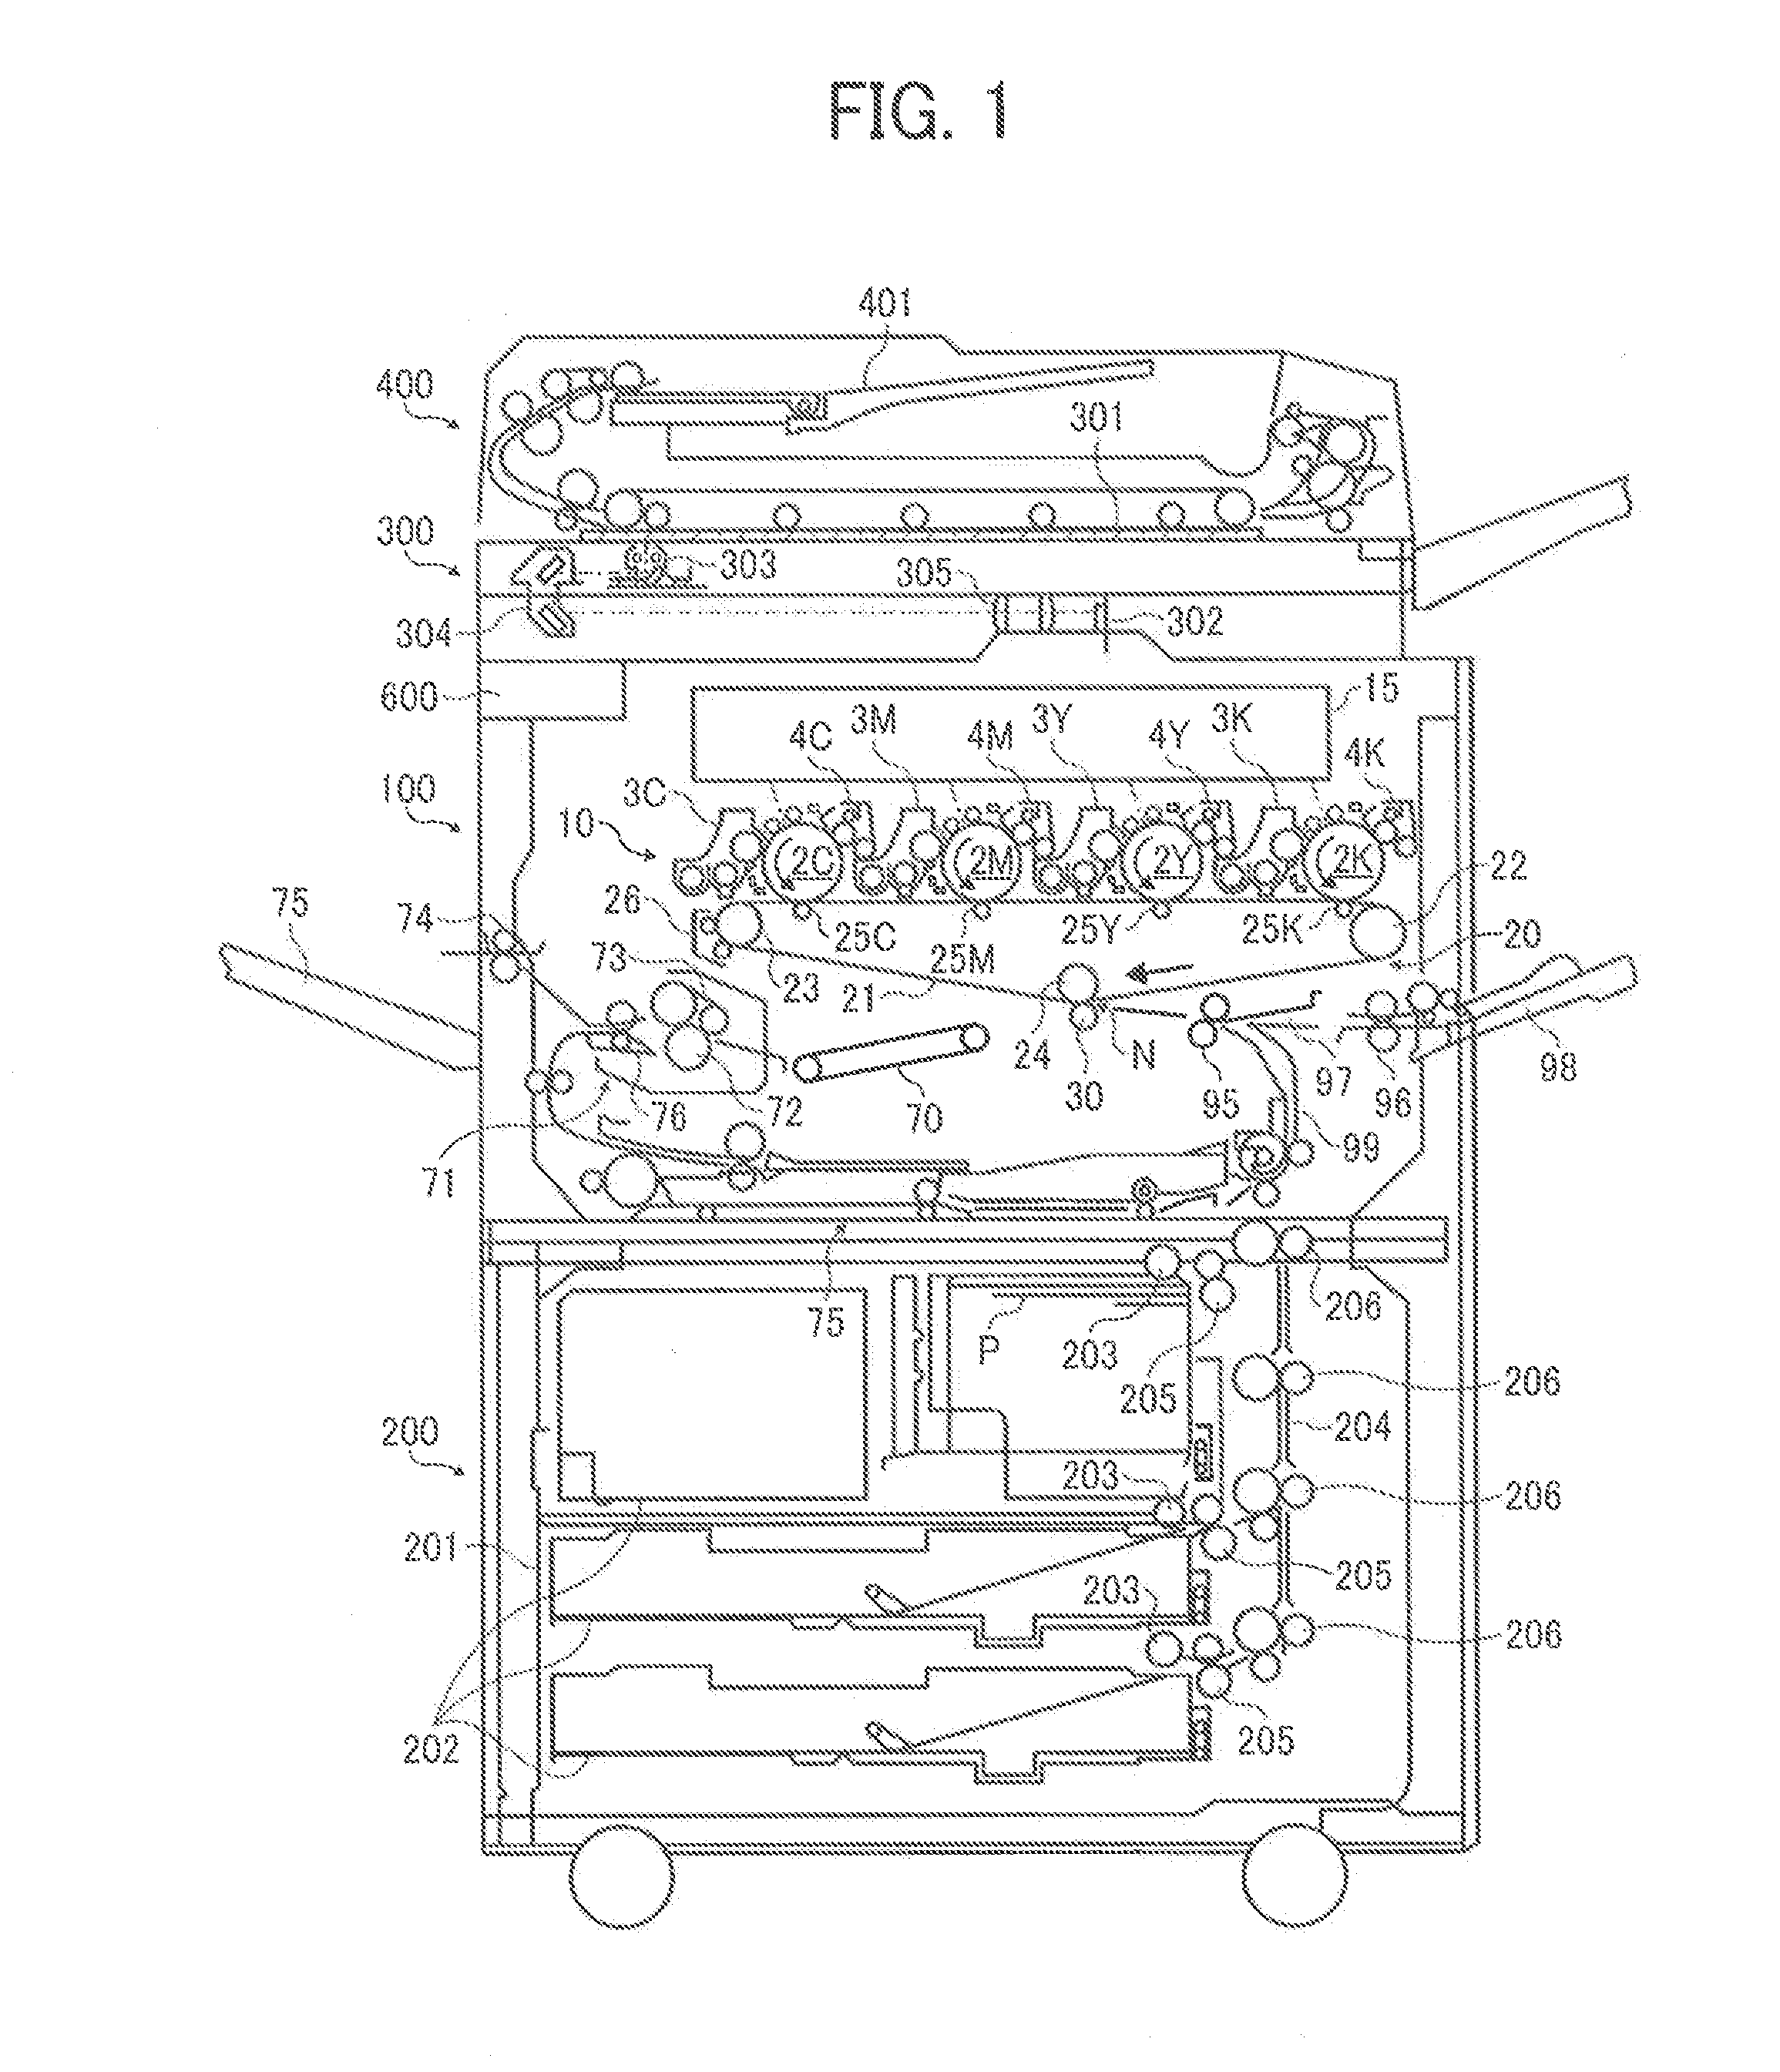 Transfer device and image forming apparatus incorporating transfer device